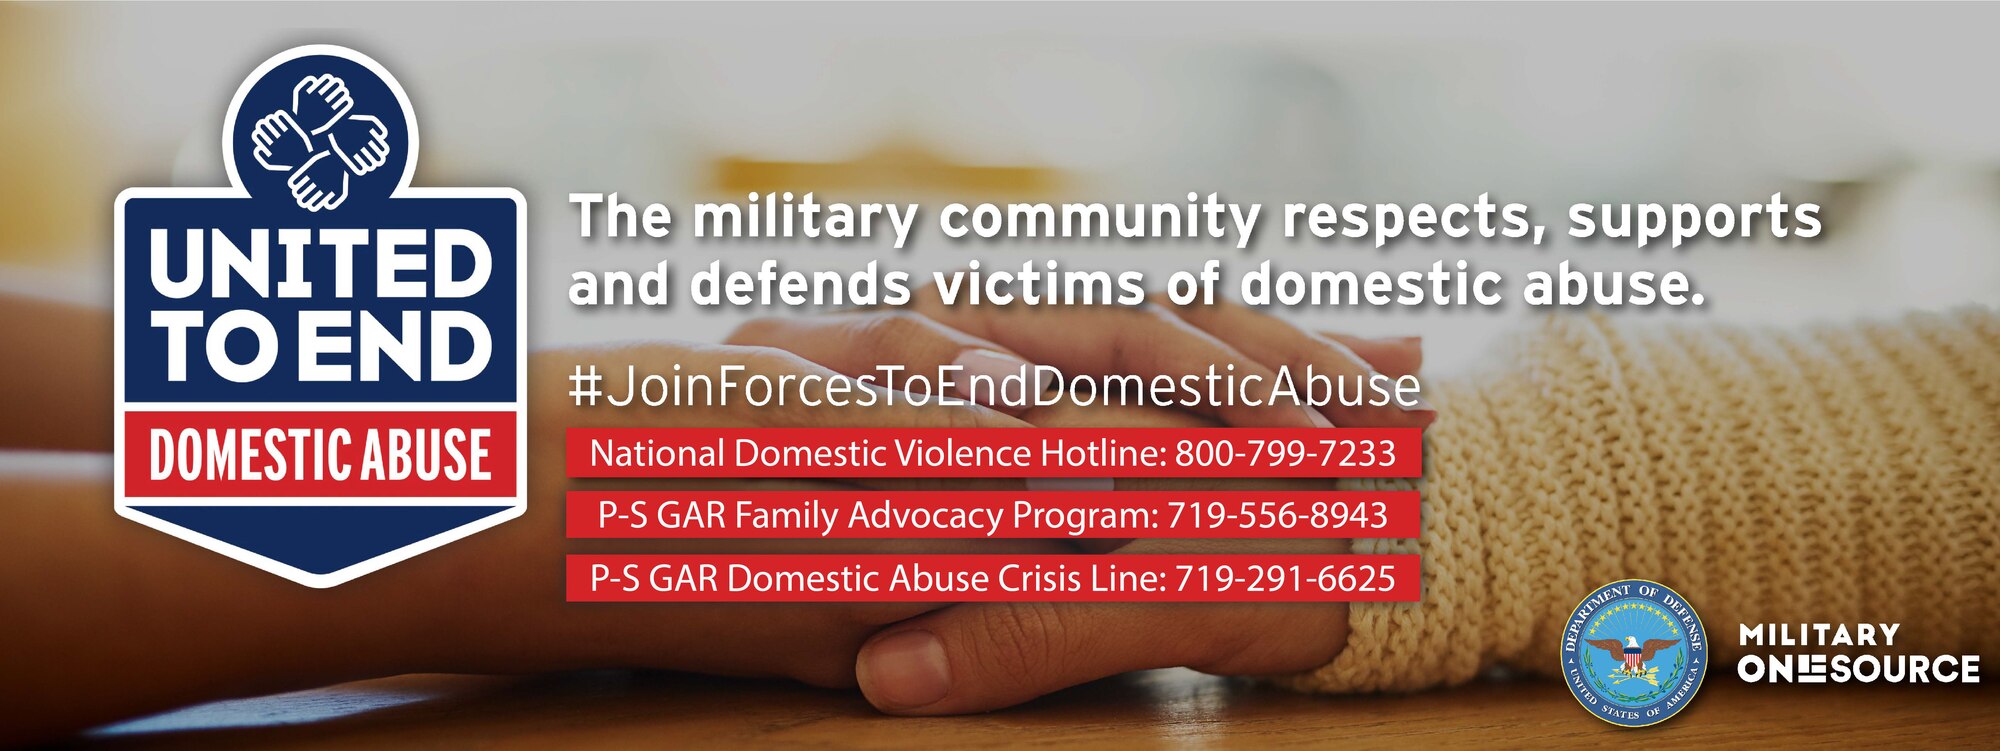 October is Domestic Violence Awareness and Prevention Month and it’s important Airmen are aware of myths associated with domestic violence. Identifying stereotypes and stigmas can be helpful to those who are in or have been in an abusive situation. For more information, contact the P-S GAR FAP at (719) 556-8943. If you are a victim of domestic violence, call the P-S GAR 24/7 Domestic Abuse Victims Advocate at (719) 291-6625. (Courtesy graphic) (Graphic has been altered to fit local criteria)